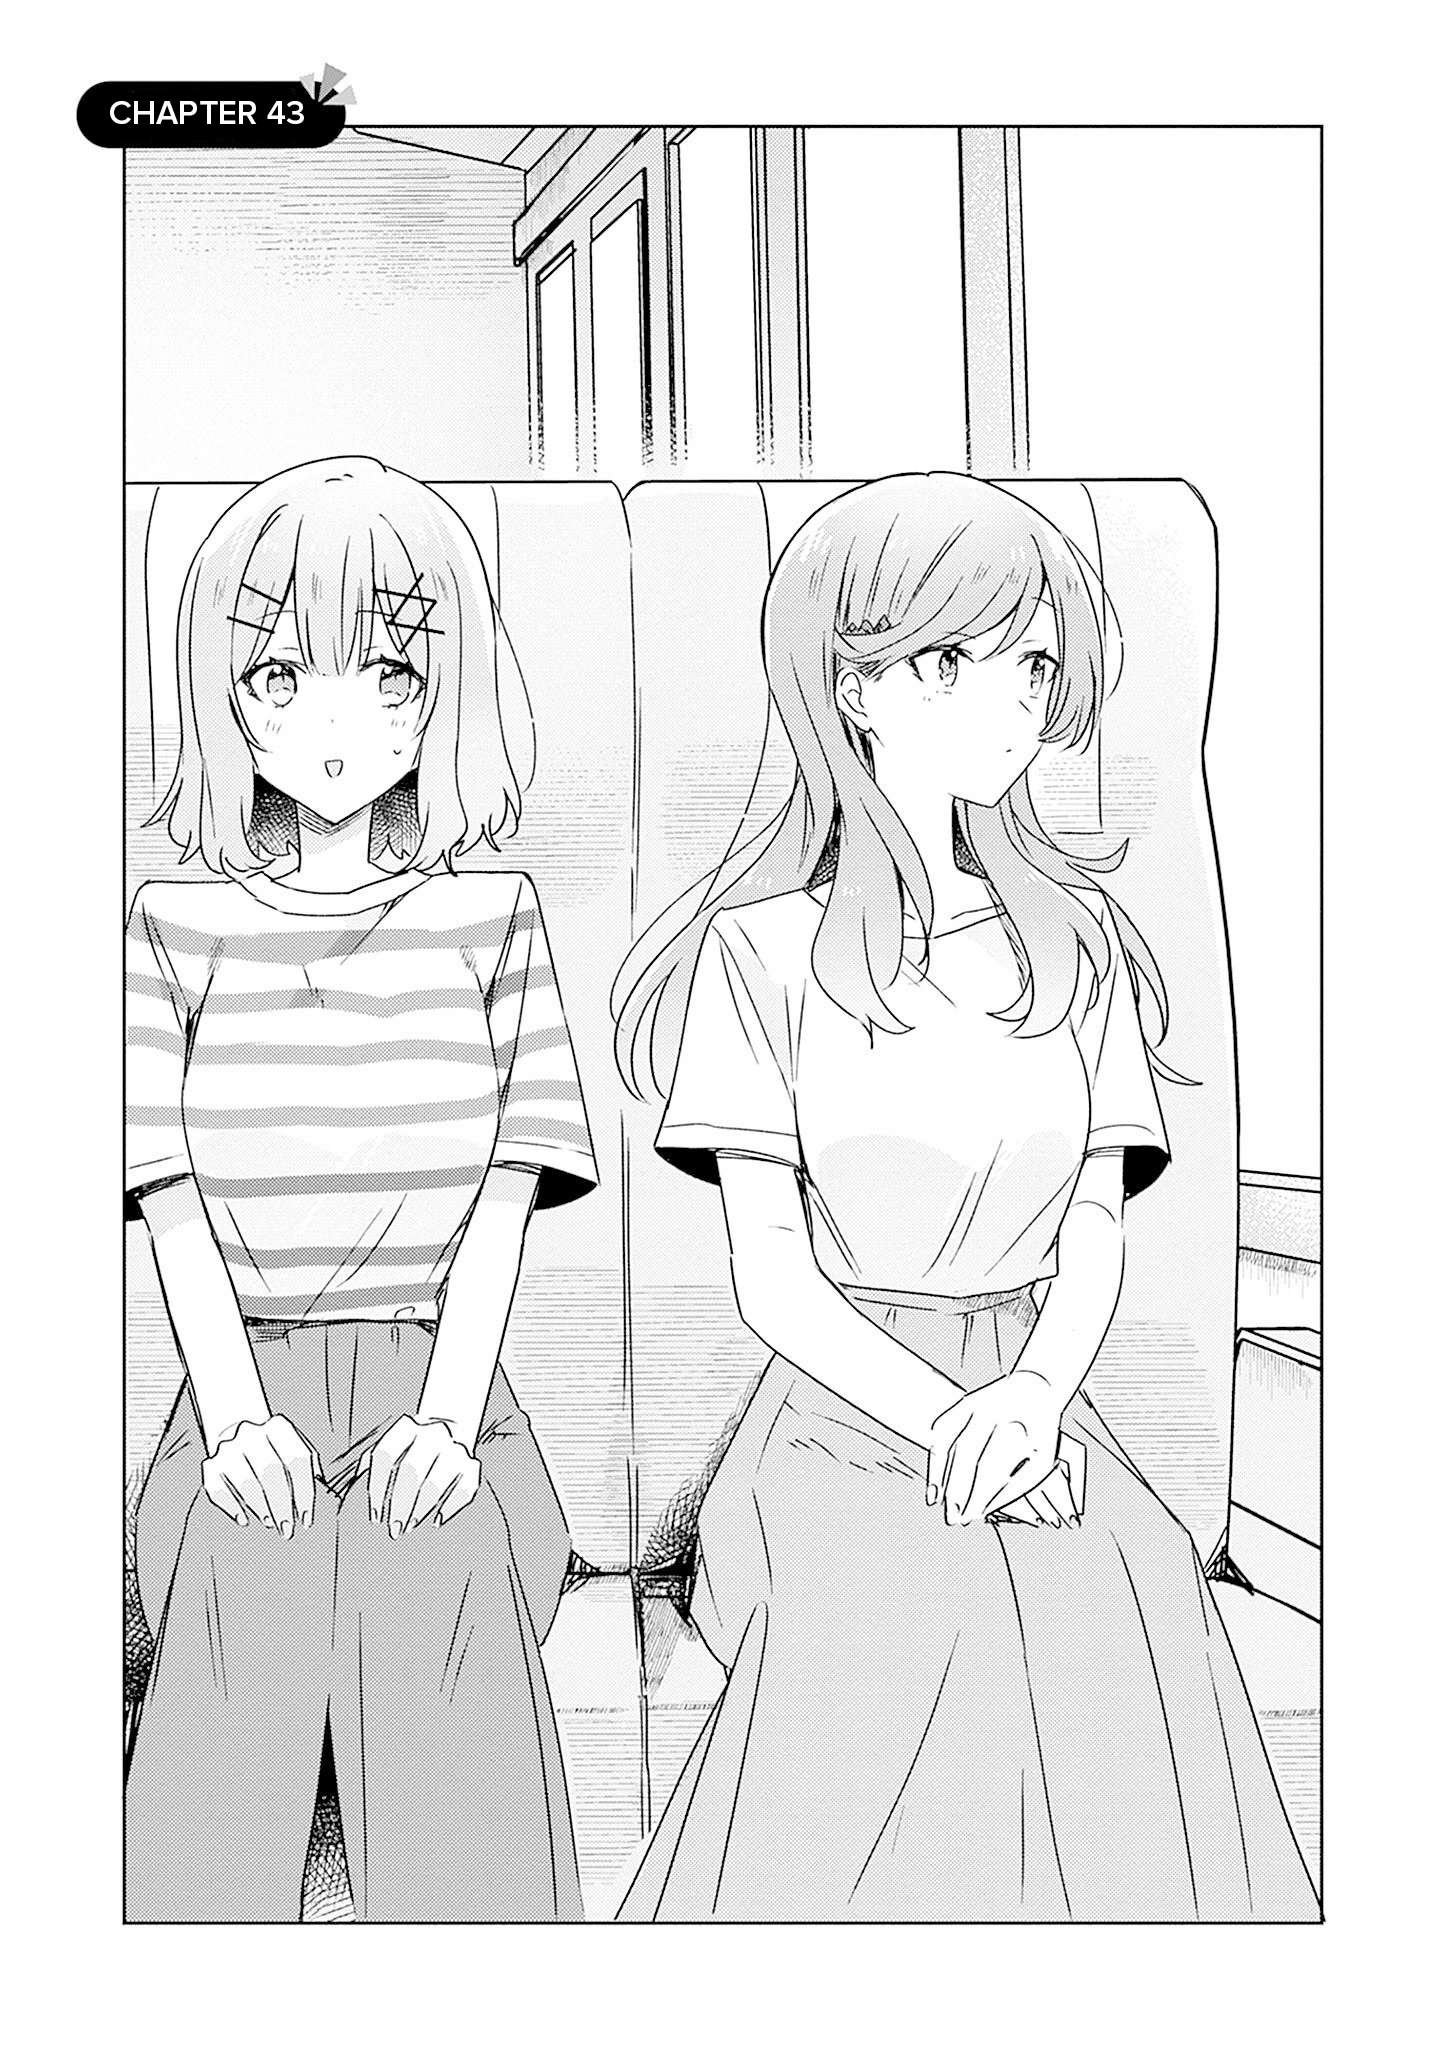 There's No Way I Can Have A Lover! *or Maybe There Is!? - chapter 43 - #1